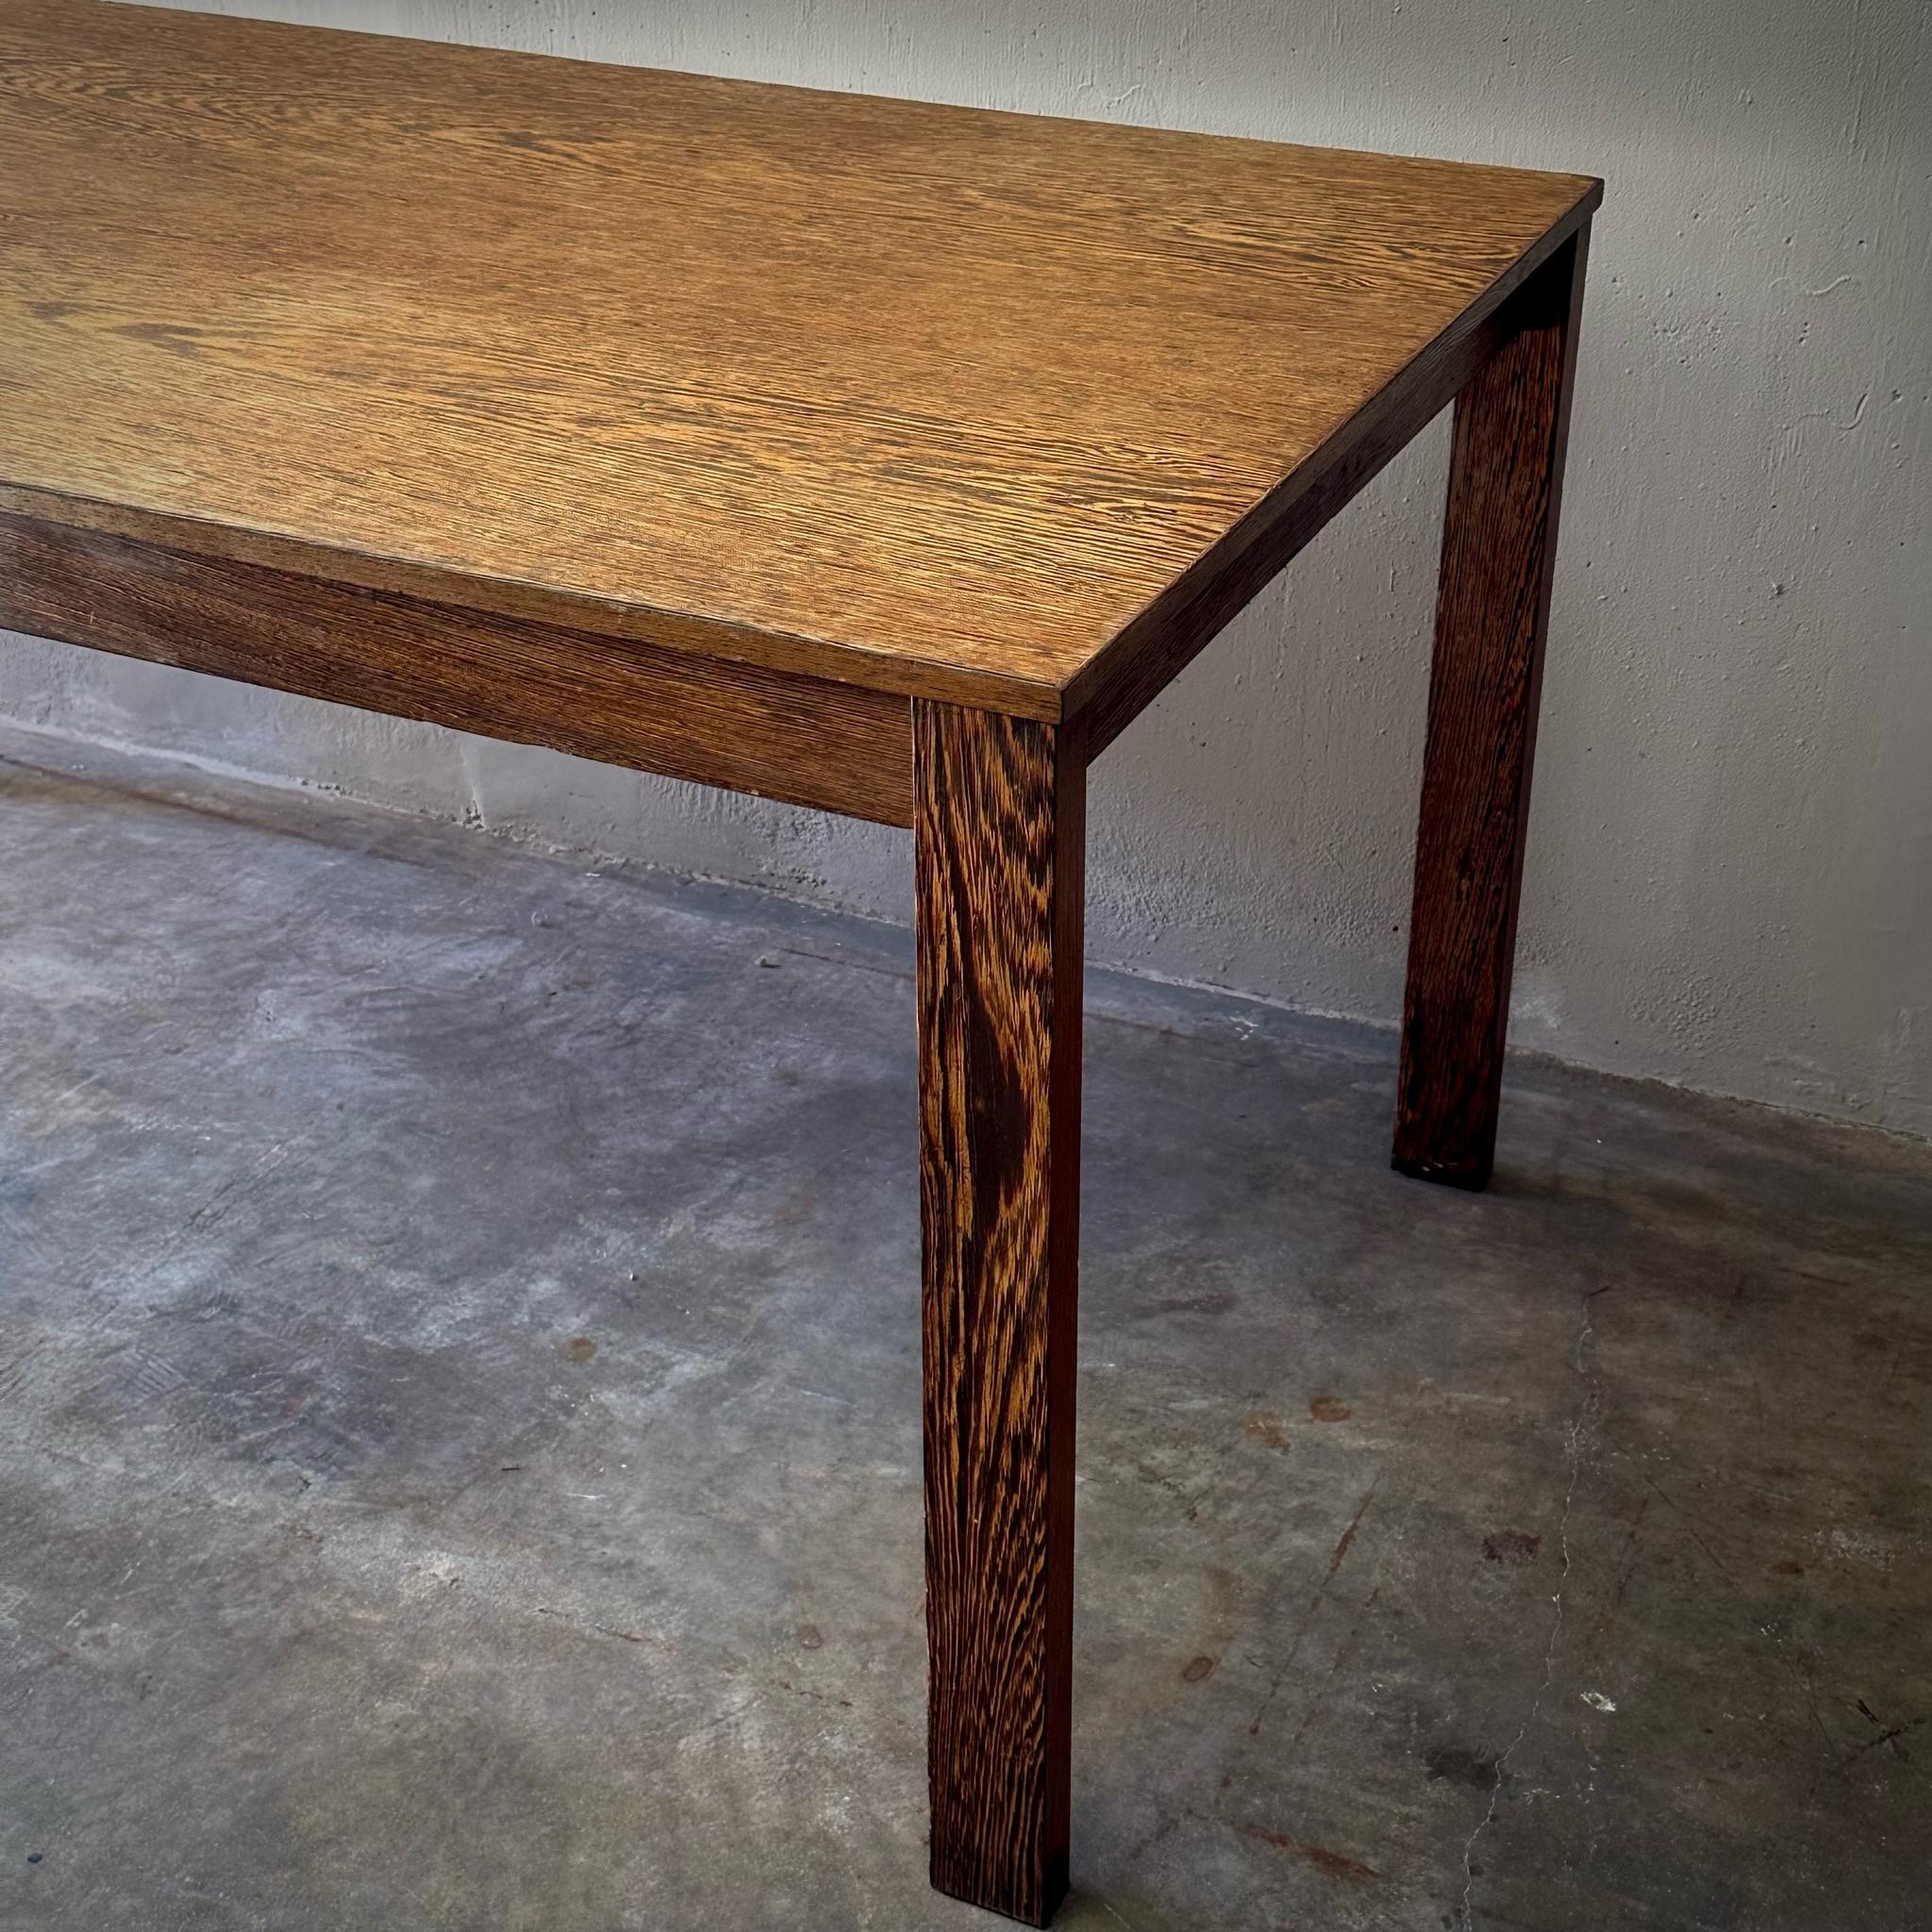 Minimalist 1970s Wenge Wood Table or Desk In Good Condition For Sale In Los Angeles, CA